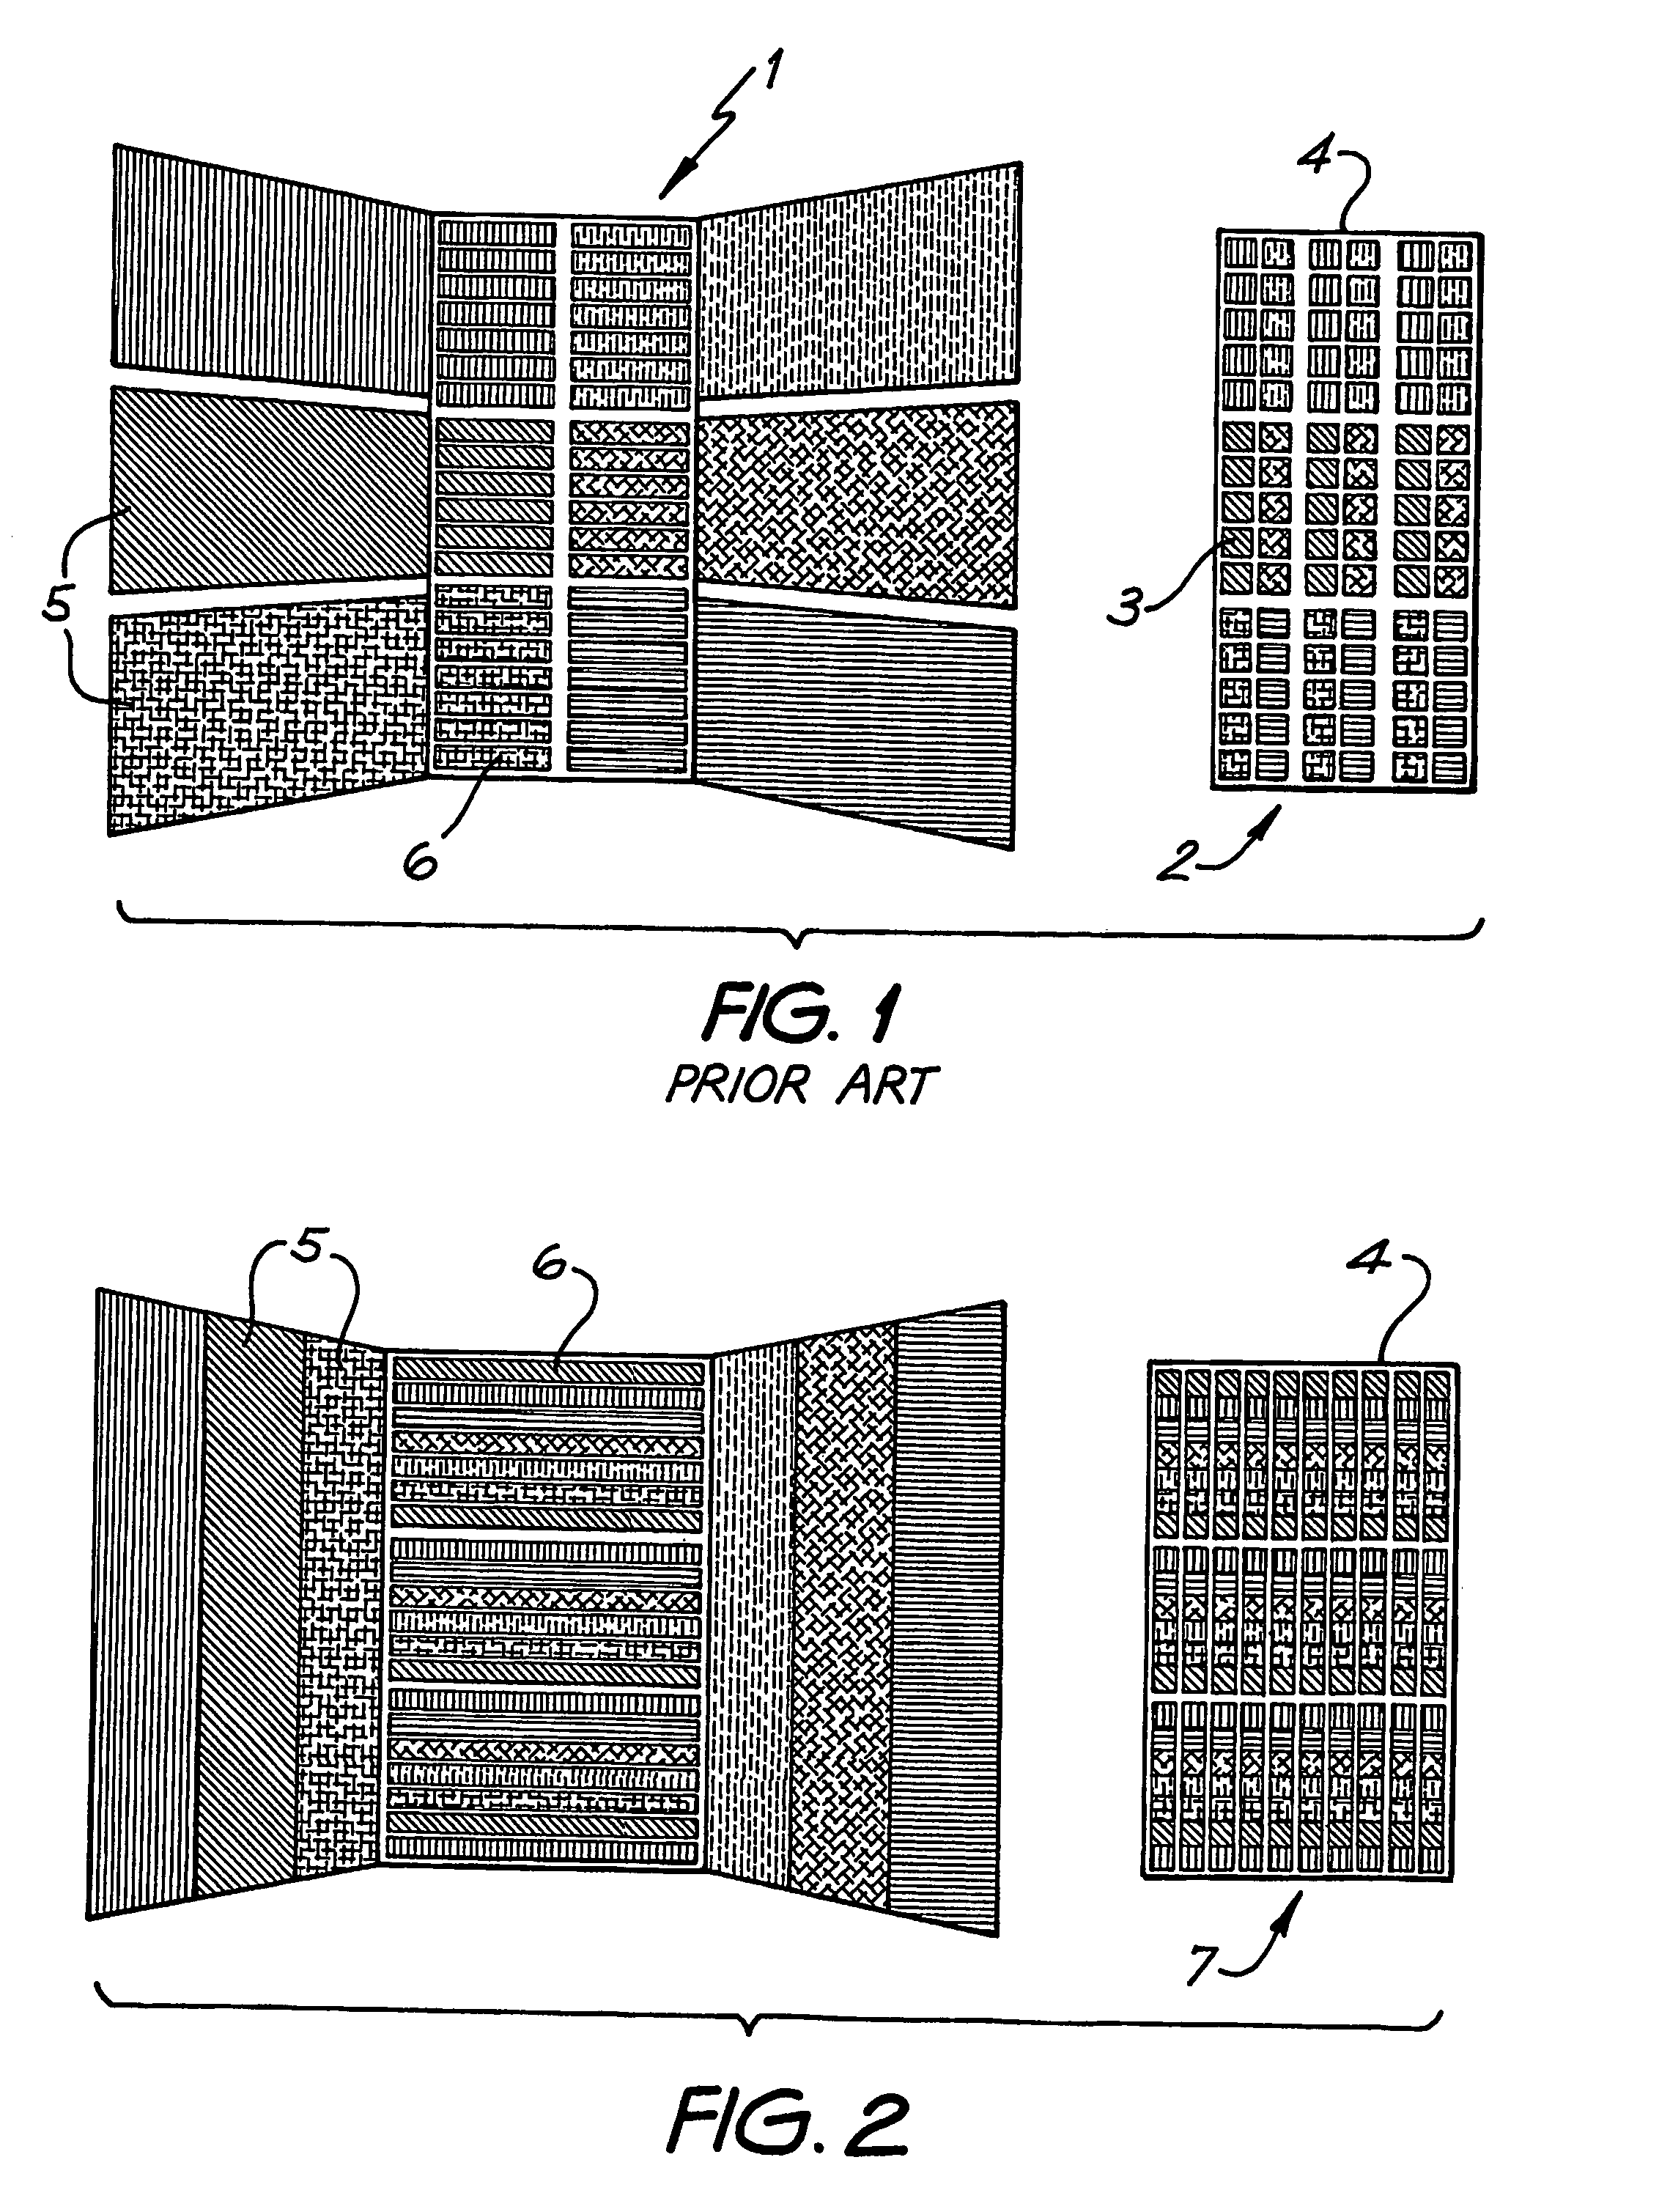 Food deposition apparatus and method of manufacturing a multi-component food product